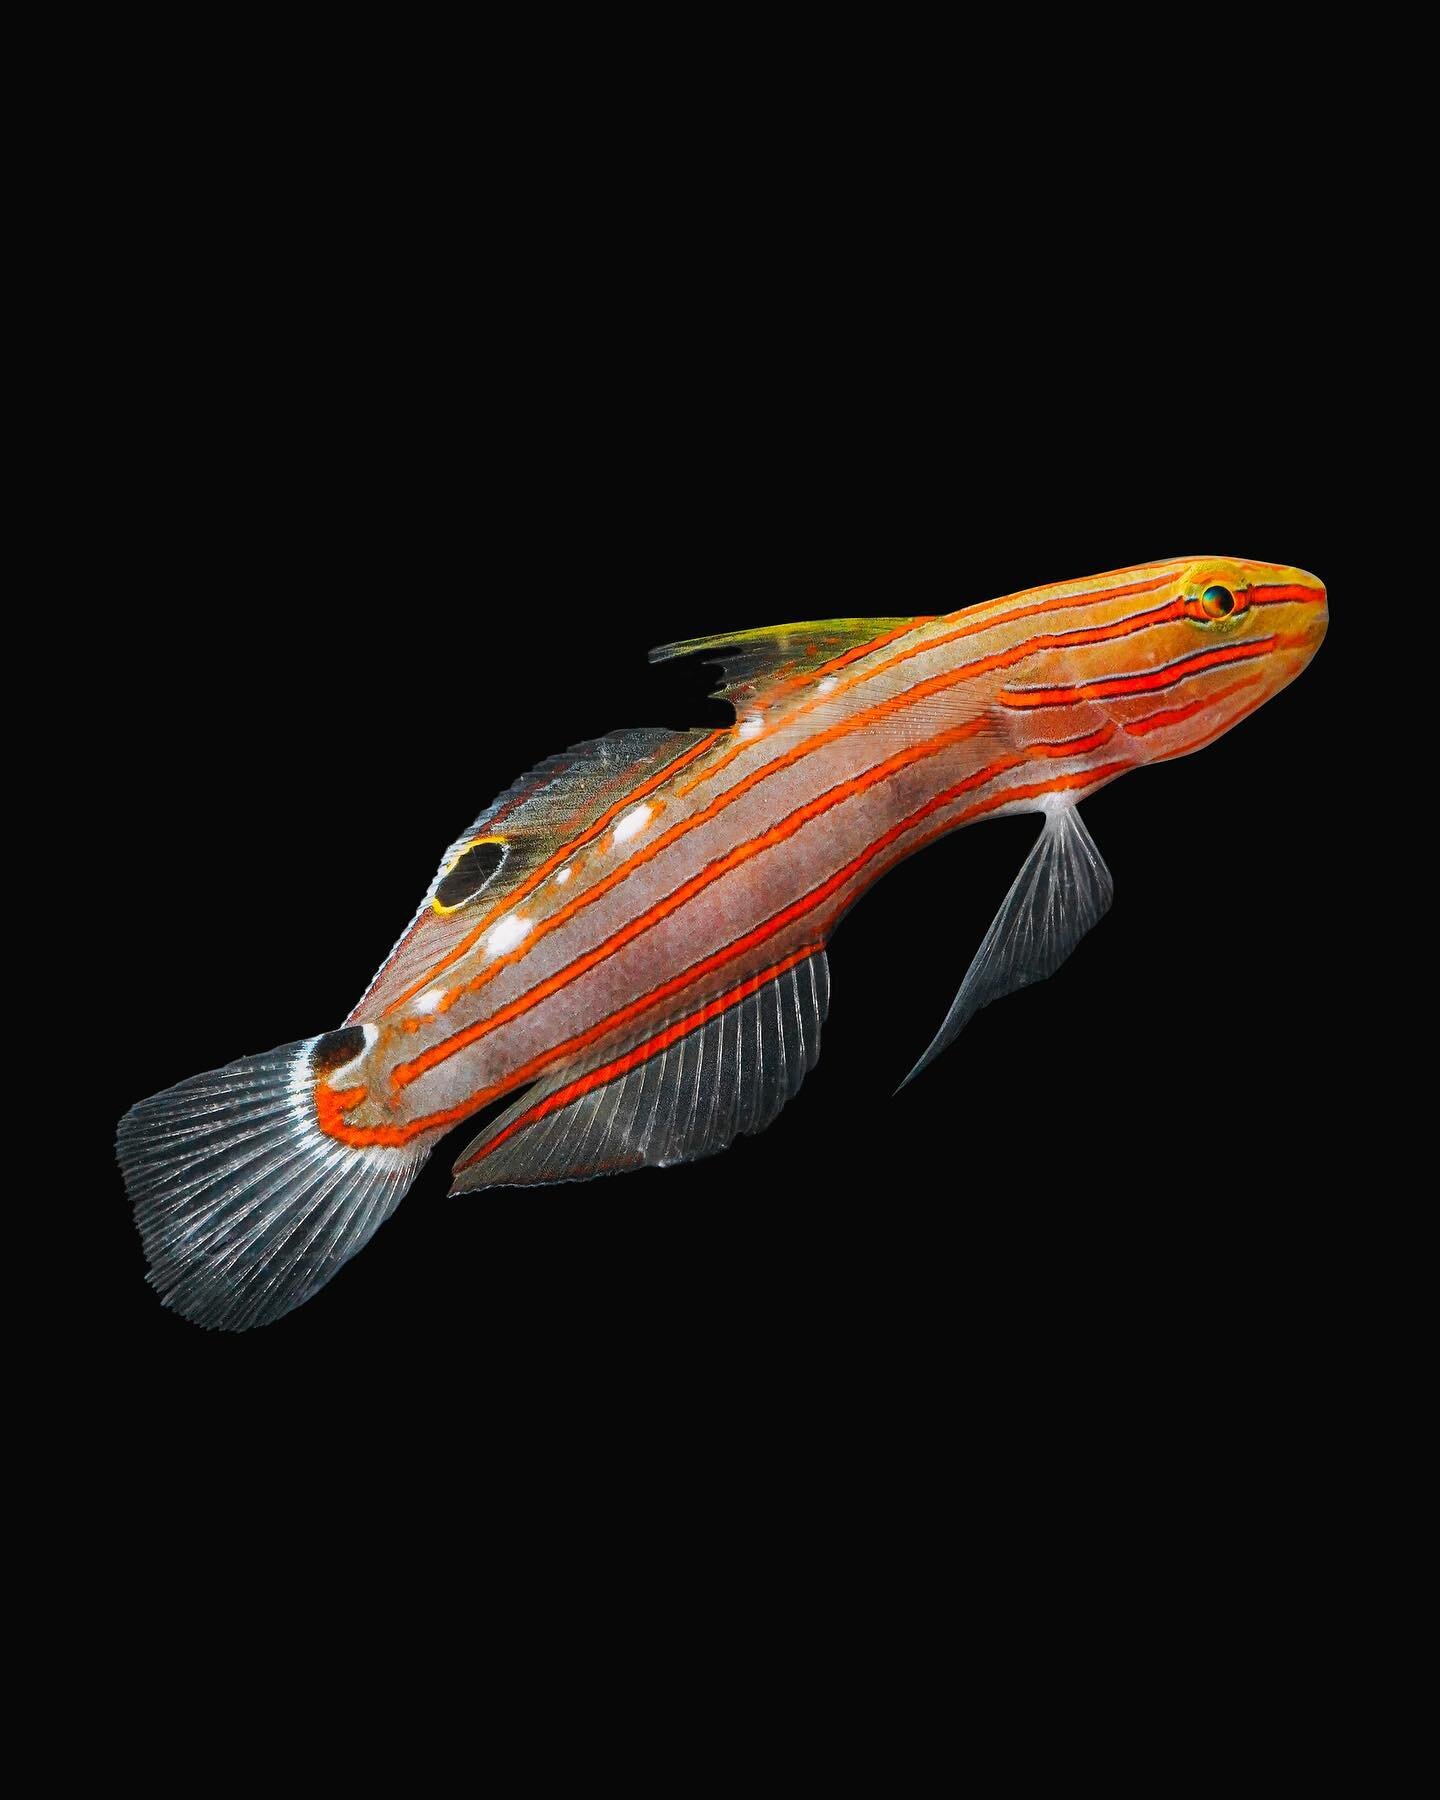 Koumansetta rainfordi, the old glory or Court Jester goby, is a species of goby native to tropical reefs of the western Pacific Ocean where it occurs at depths of from 2 to 30 metres. This species can reach a length of 8.5 centimetres SL. 

#rainford